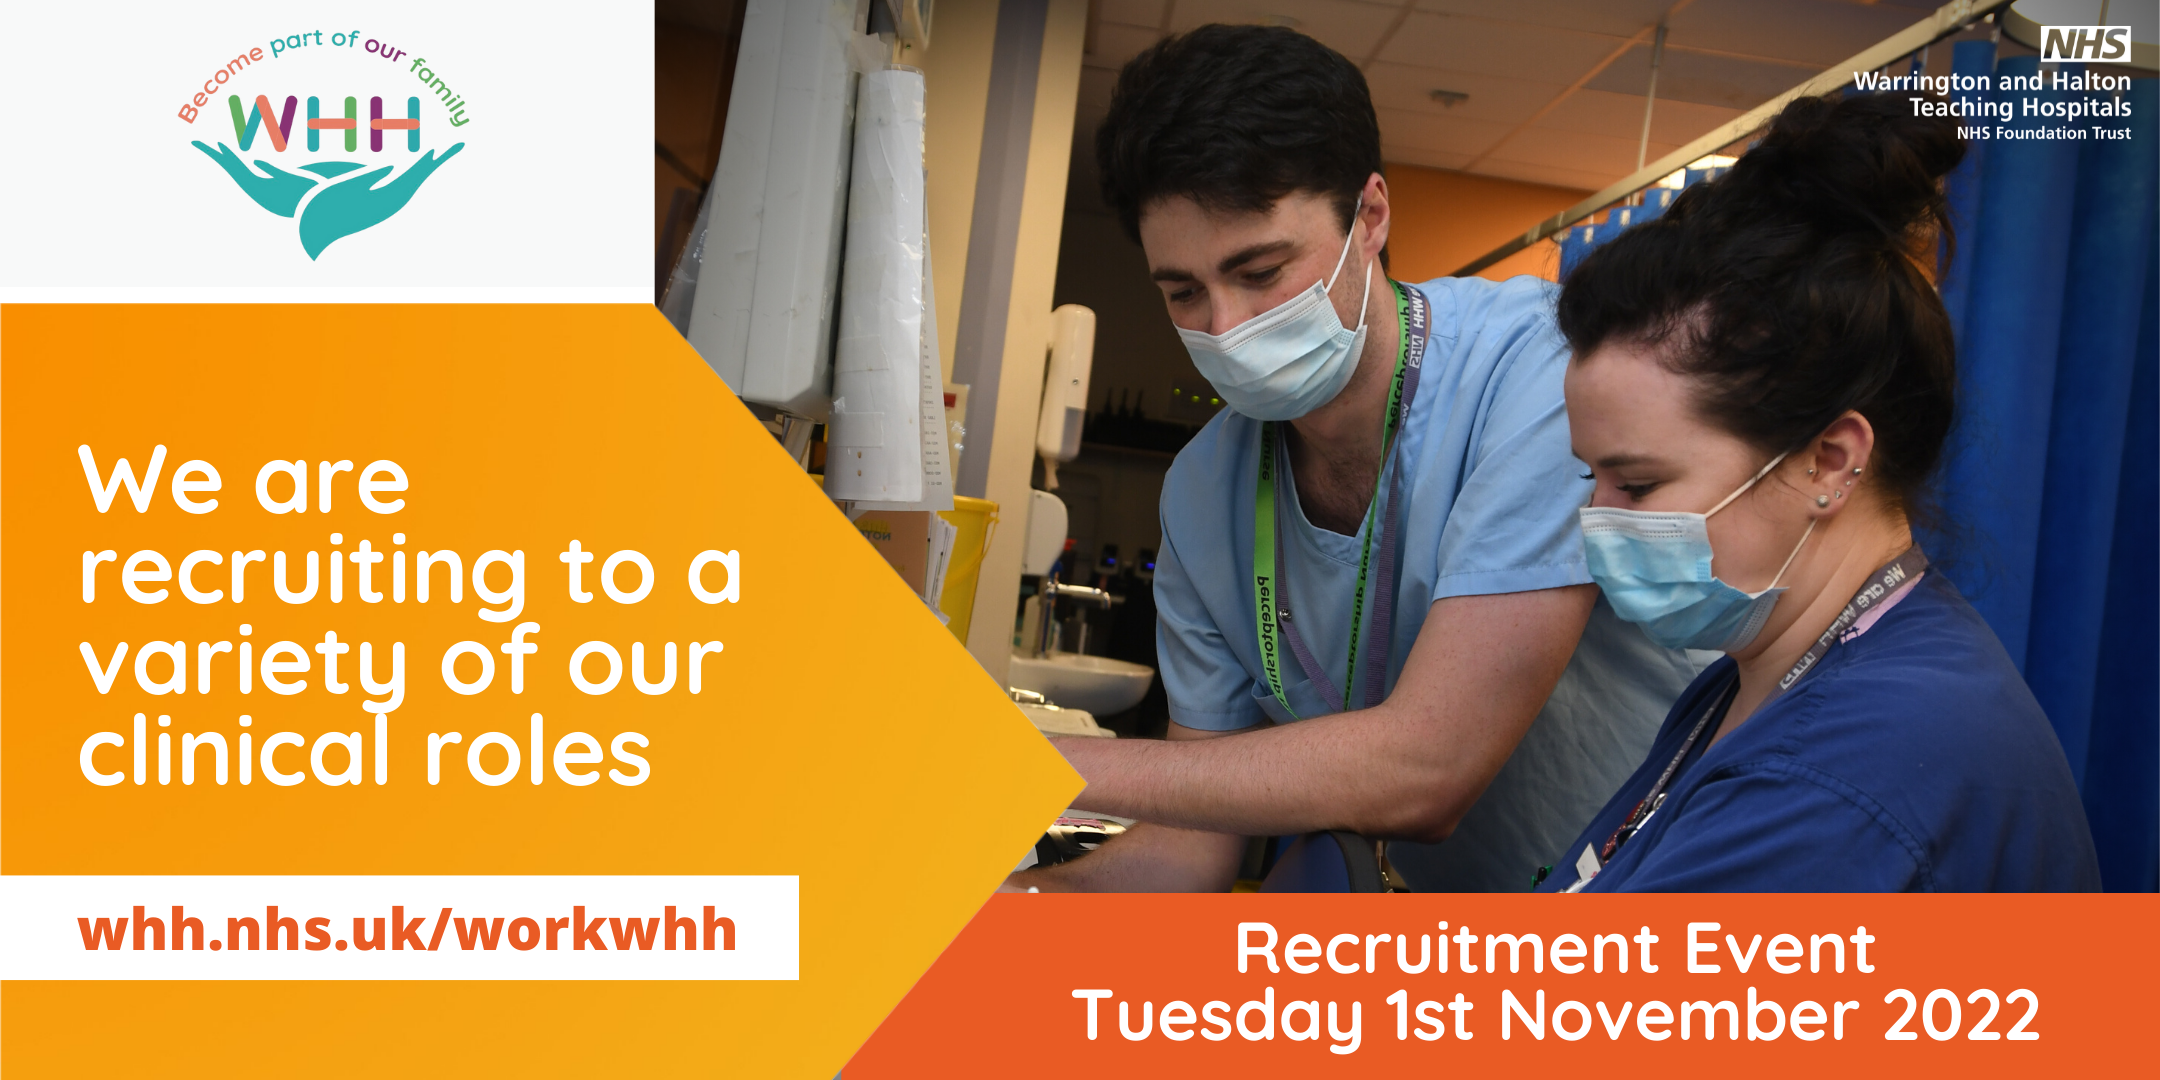 We are recruiting Nurses, Midwives and Allied Health Professionals to join WHH (8).png